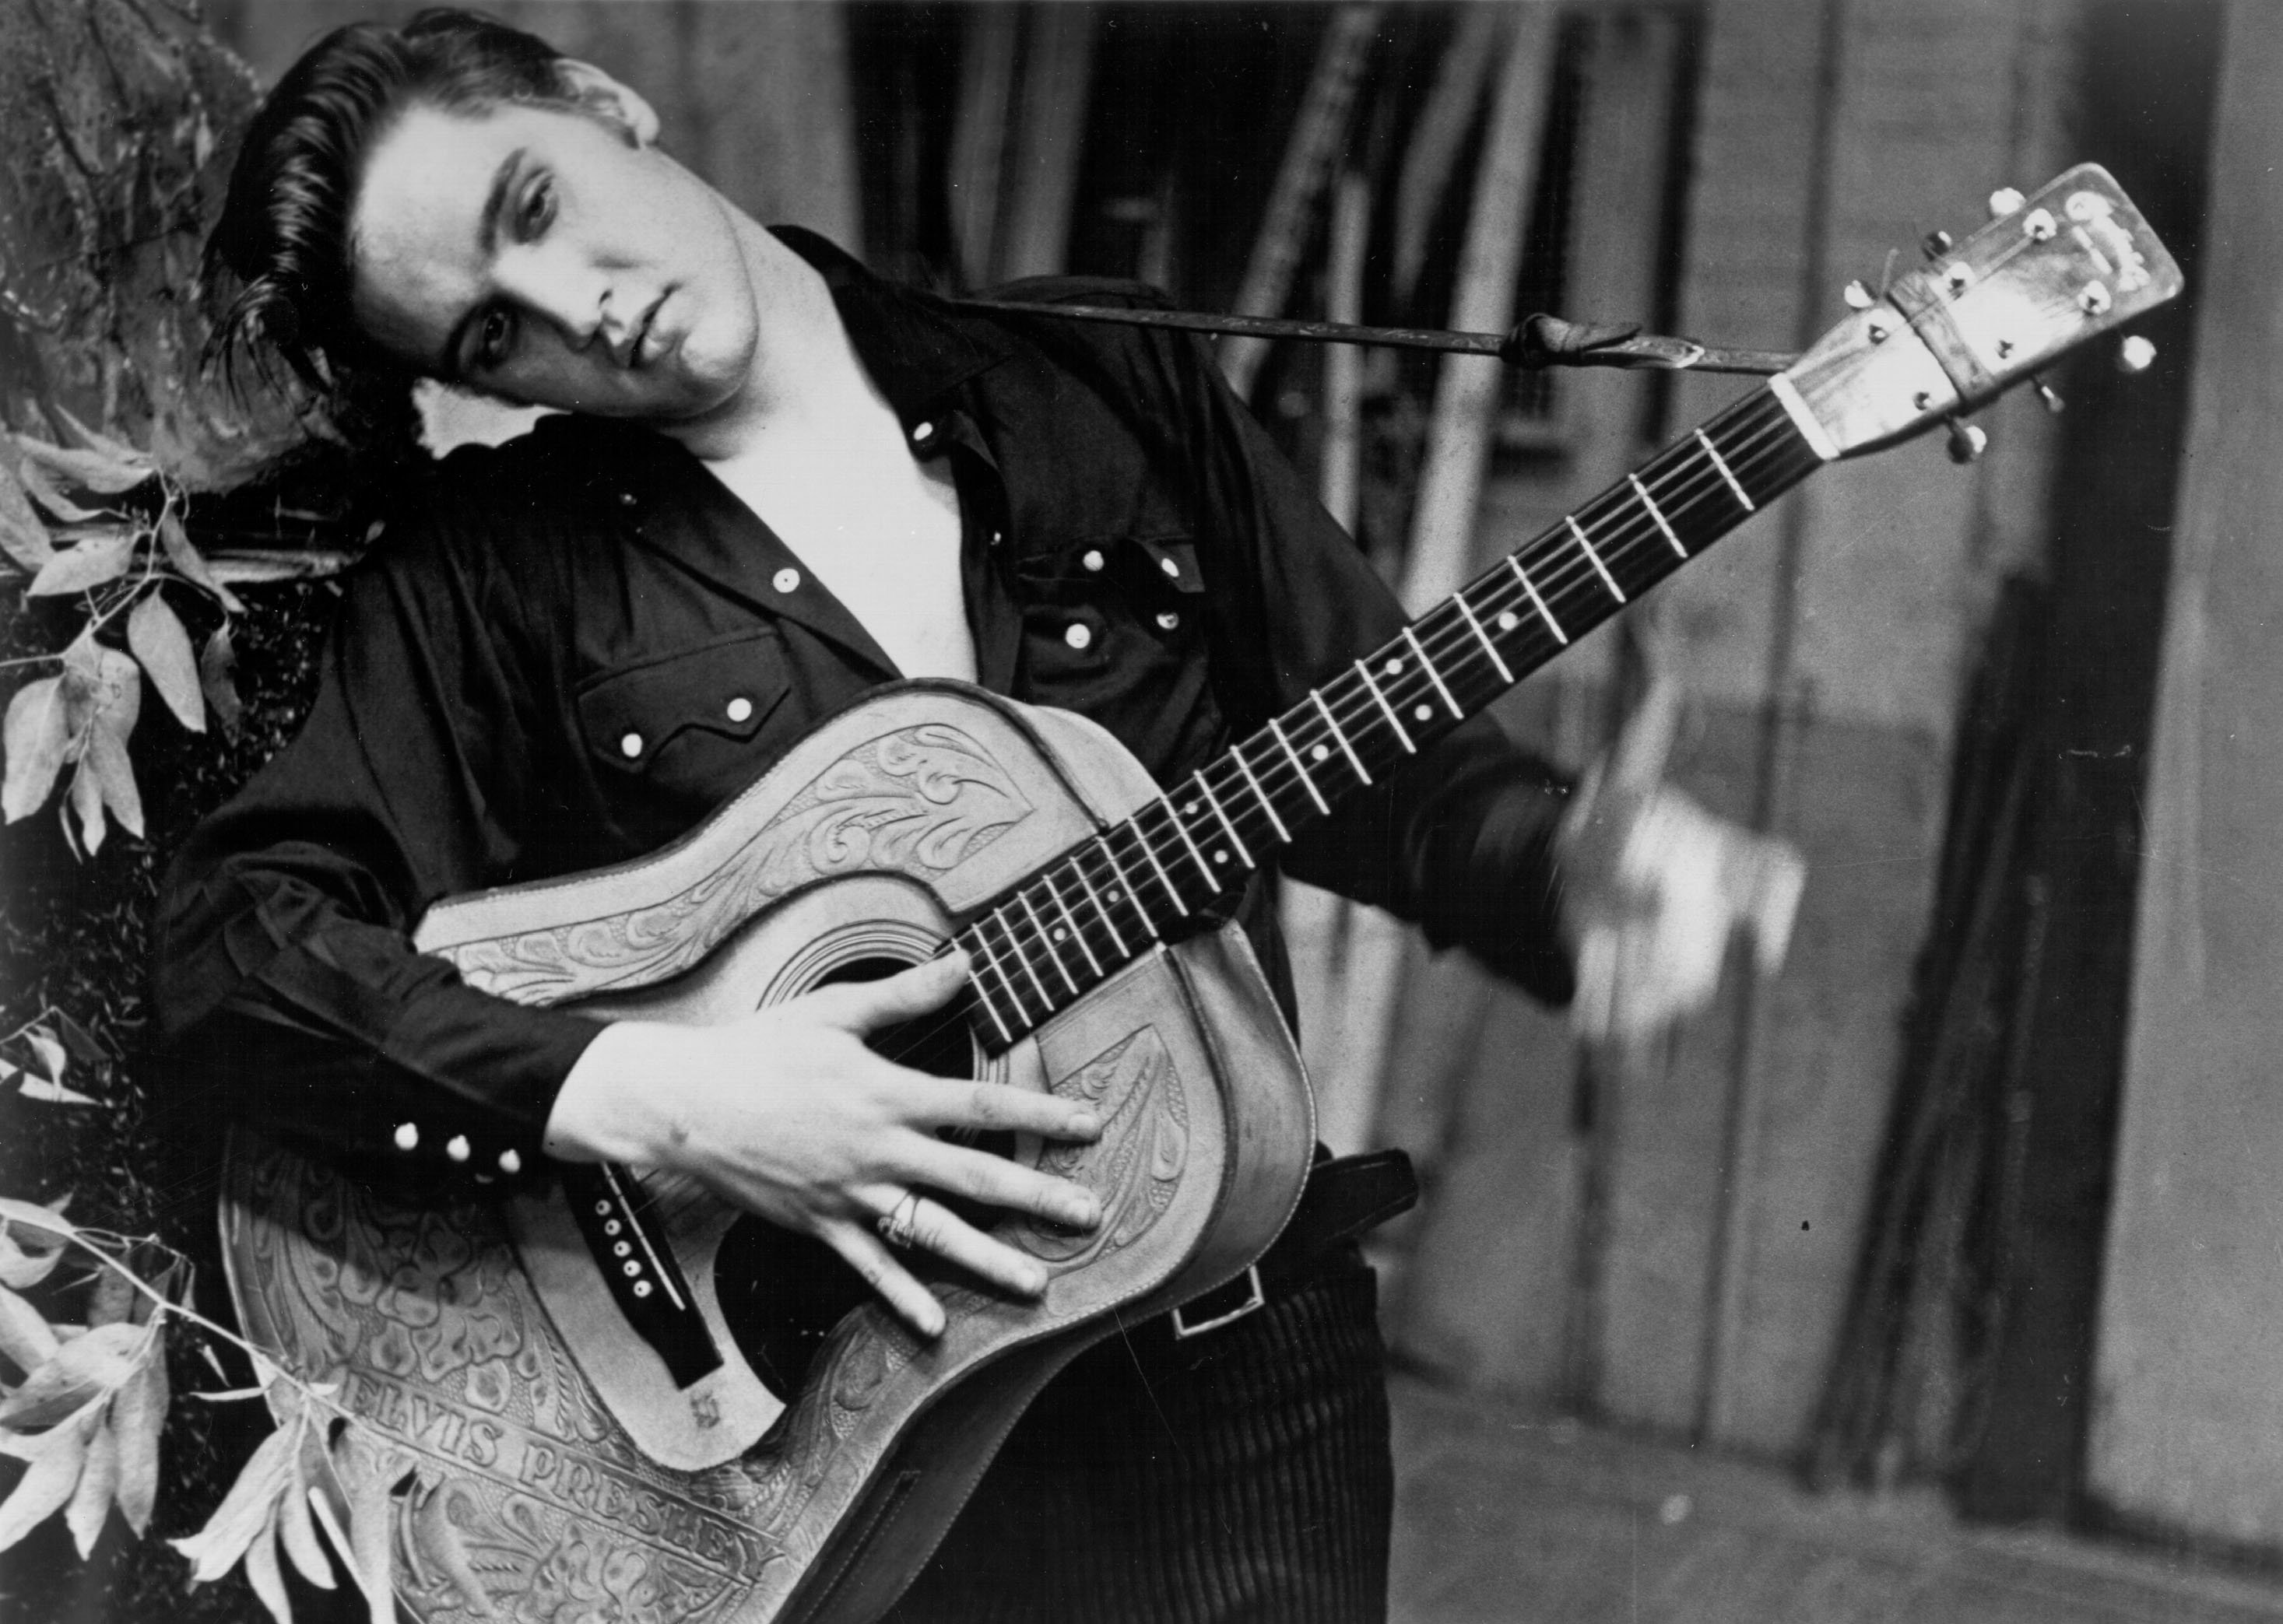 A portrait of Elvis Presley in black and white. He's leaning against a wall, holding his guitar.